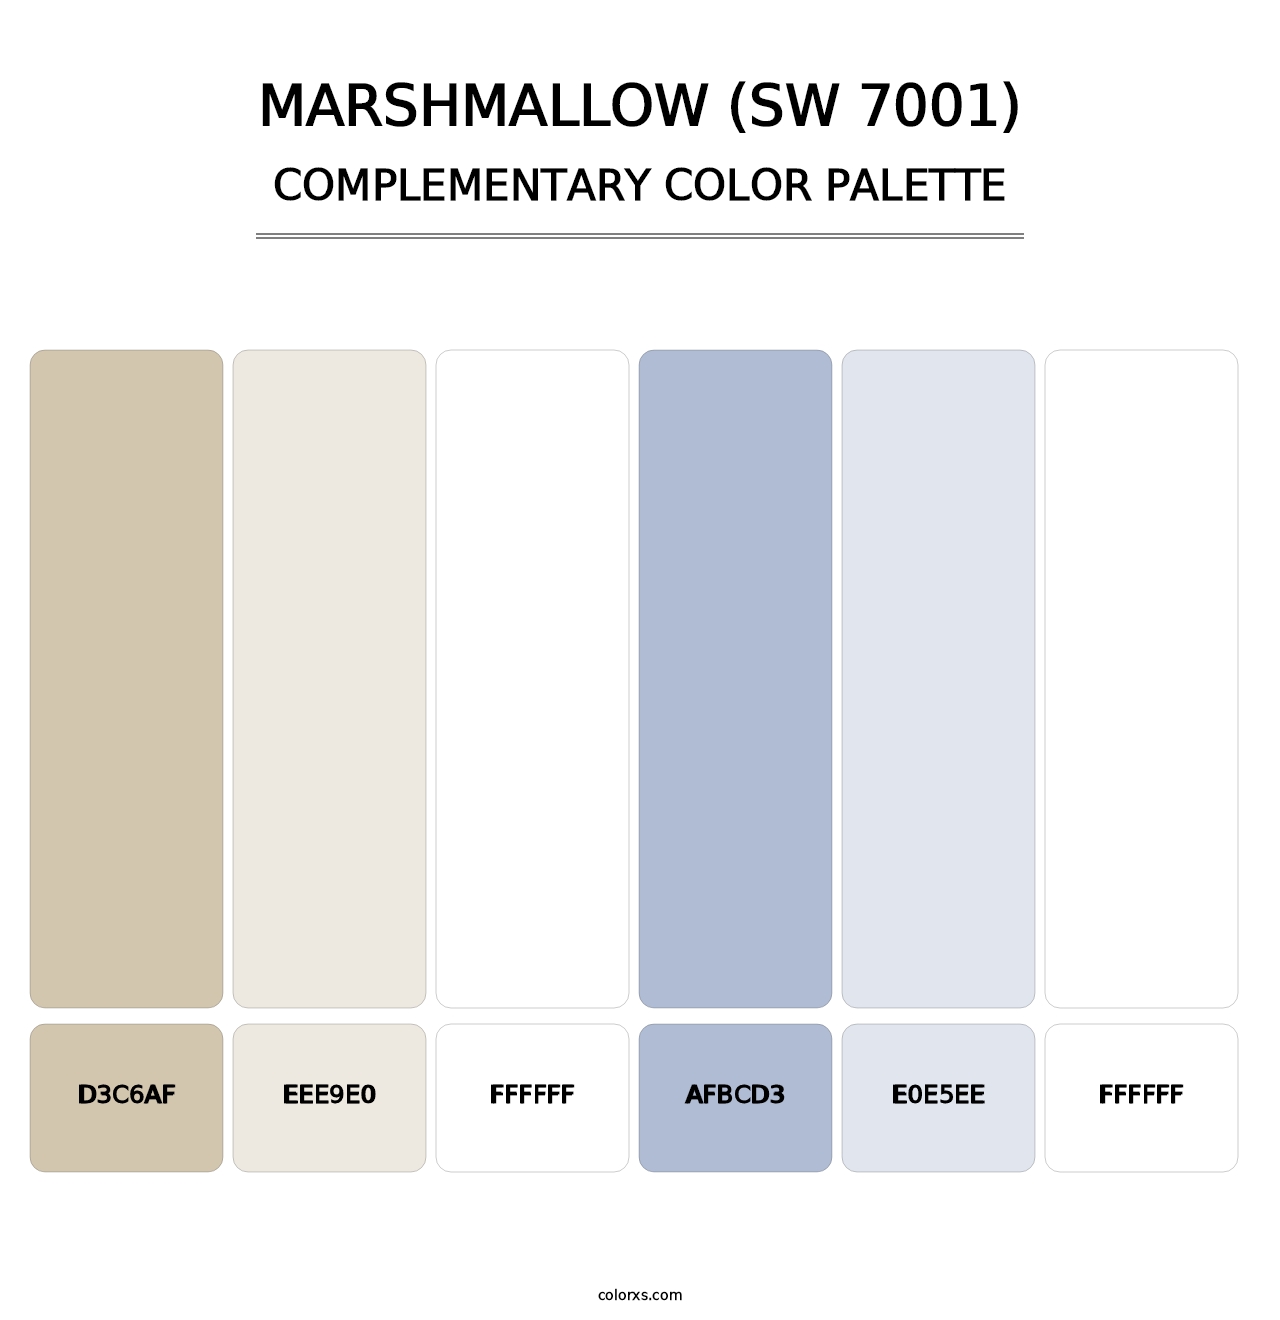 Marshmallow (SW 7001) - Complementary Color Palette